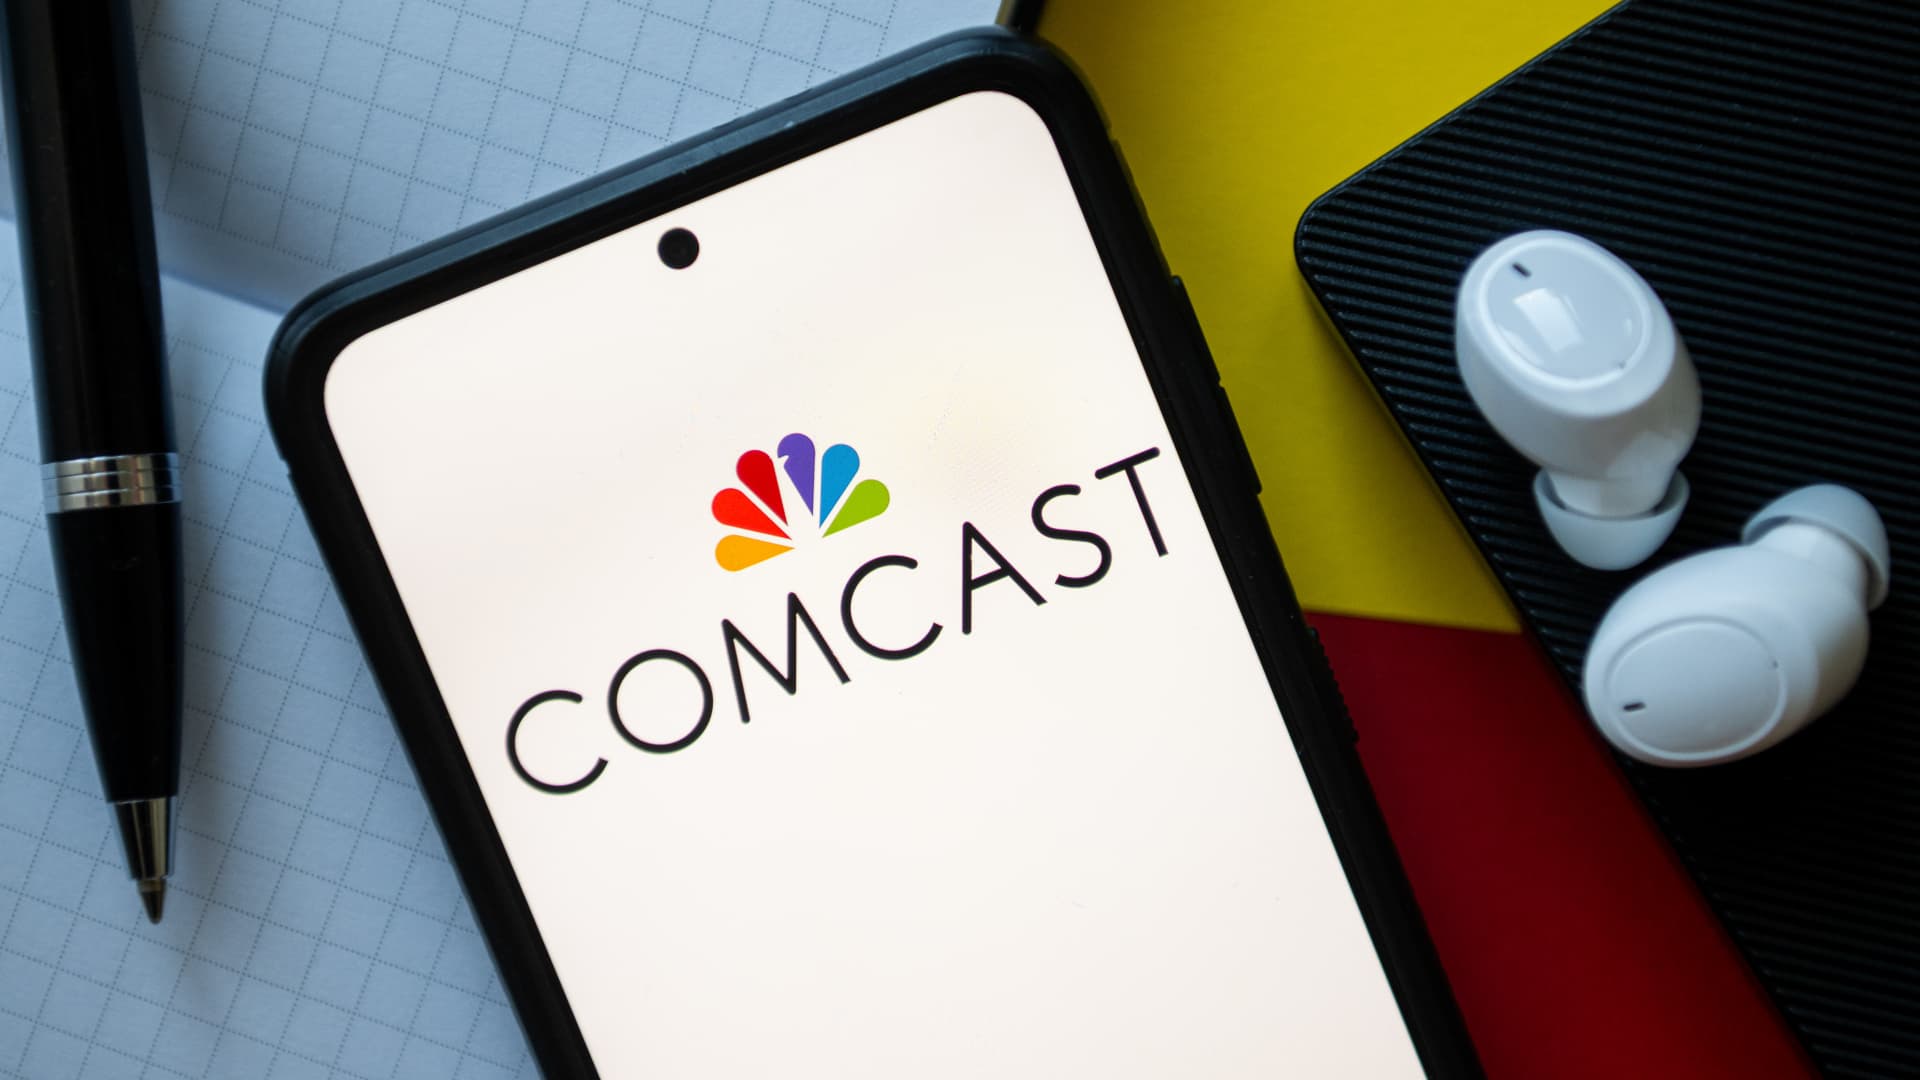 Comcast launches prepaid and month-to-month internet and phone plans - CNBC